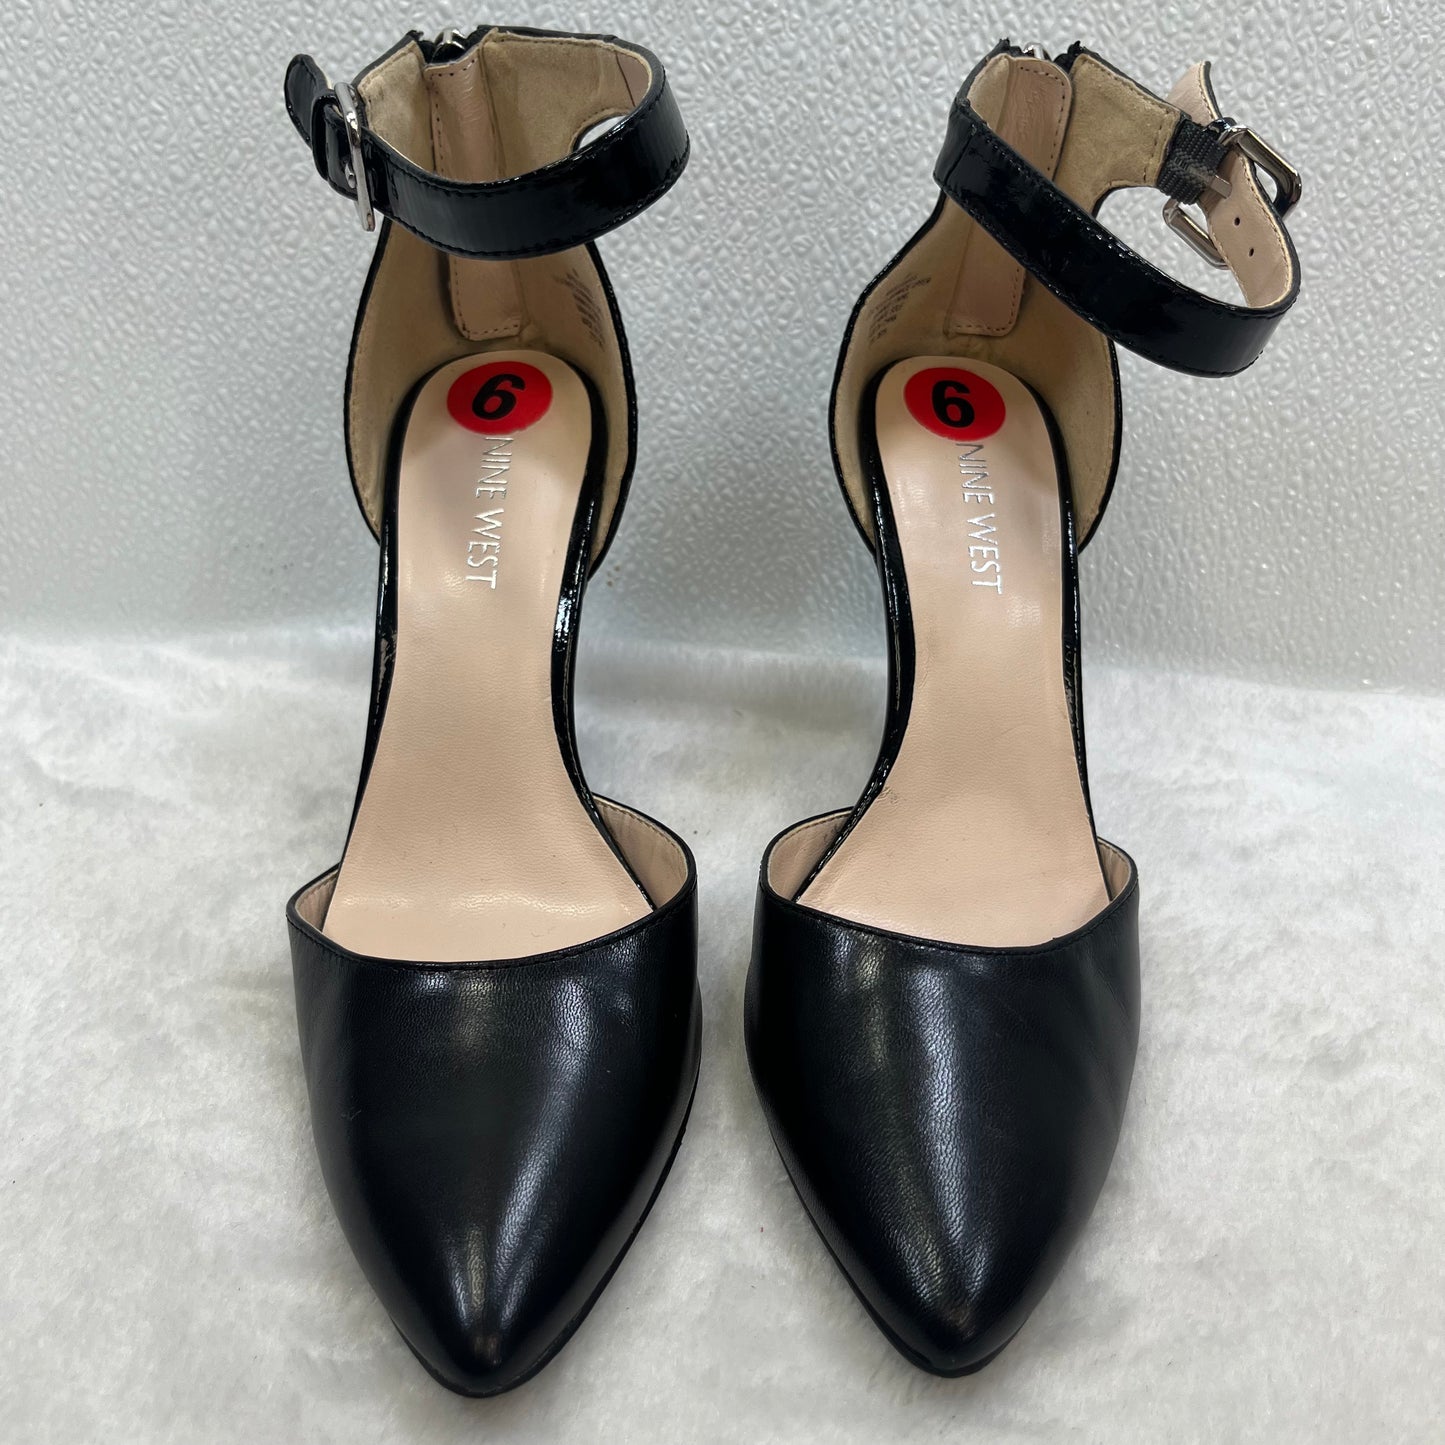 Shoes Heels Stiletto By Nine West Apparel  Size: 6